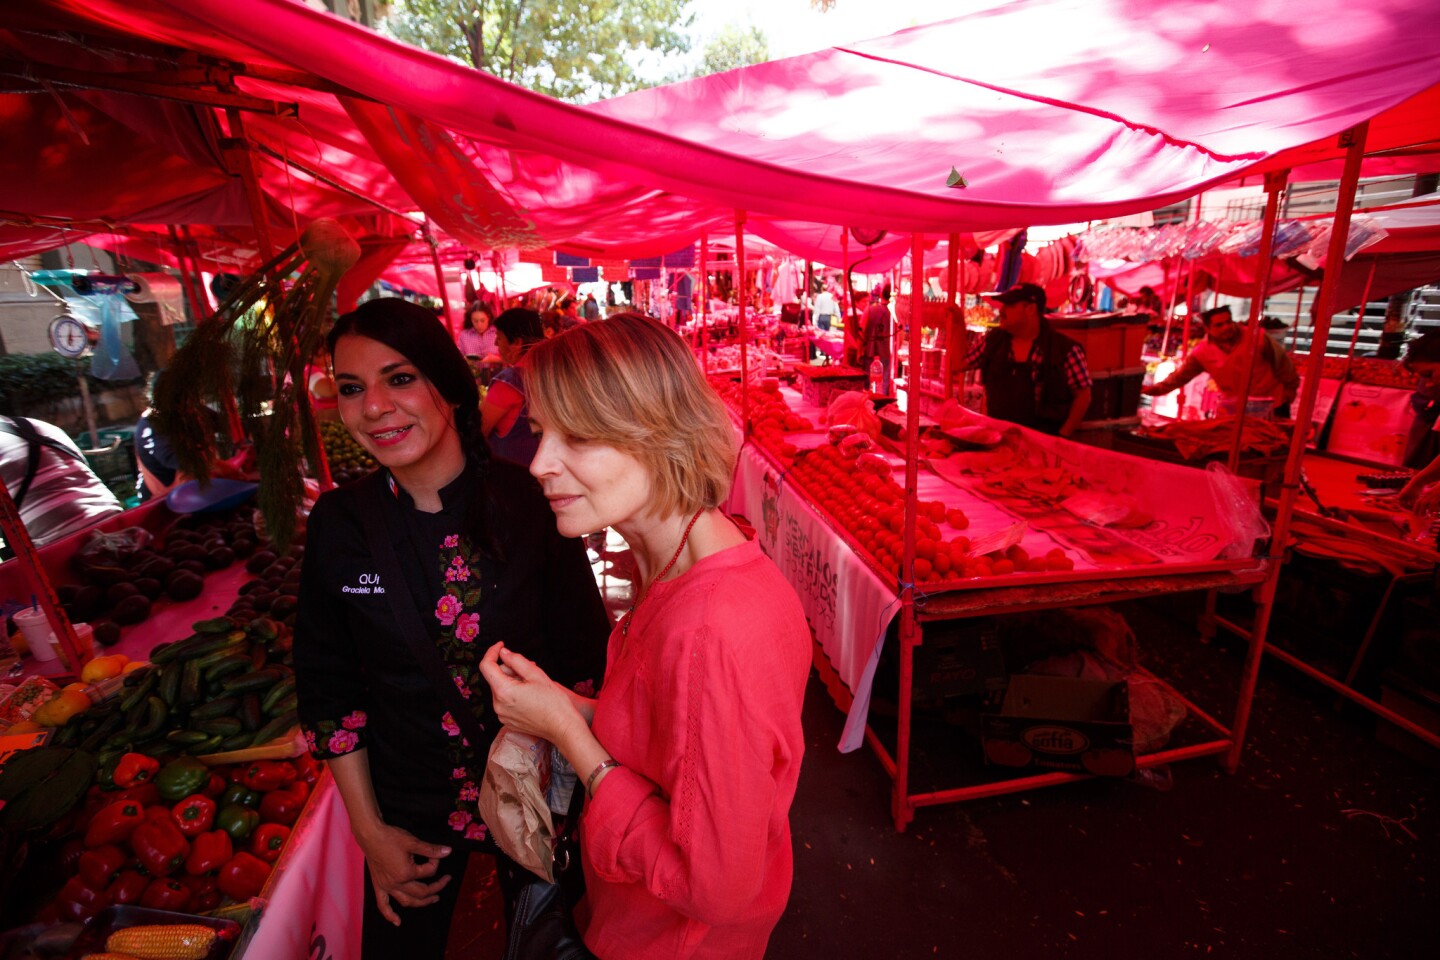 One way to explore a city is through its food. In Mexico City, Graciela Montaño, left, leads Liz Elliot on a tour of a traditional open-air market as part of an Aura Club de Maridaje tour.